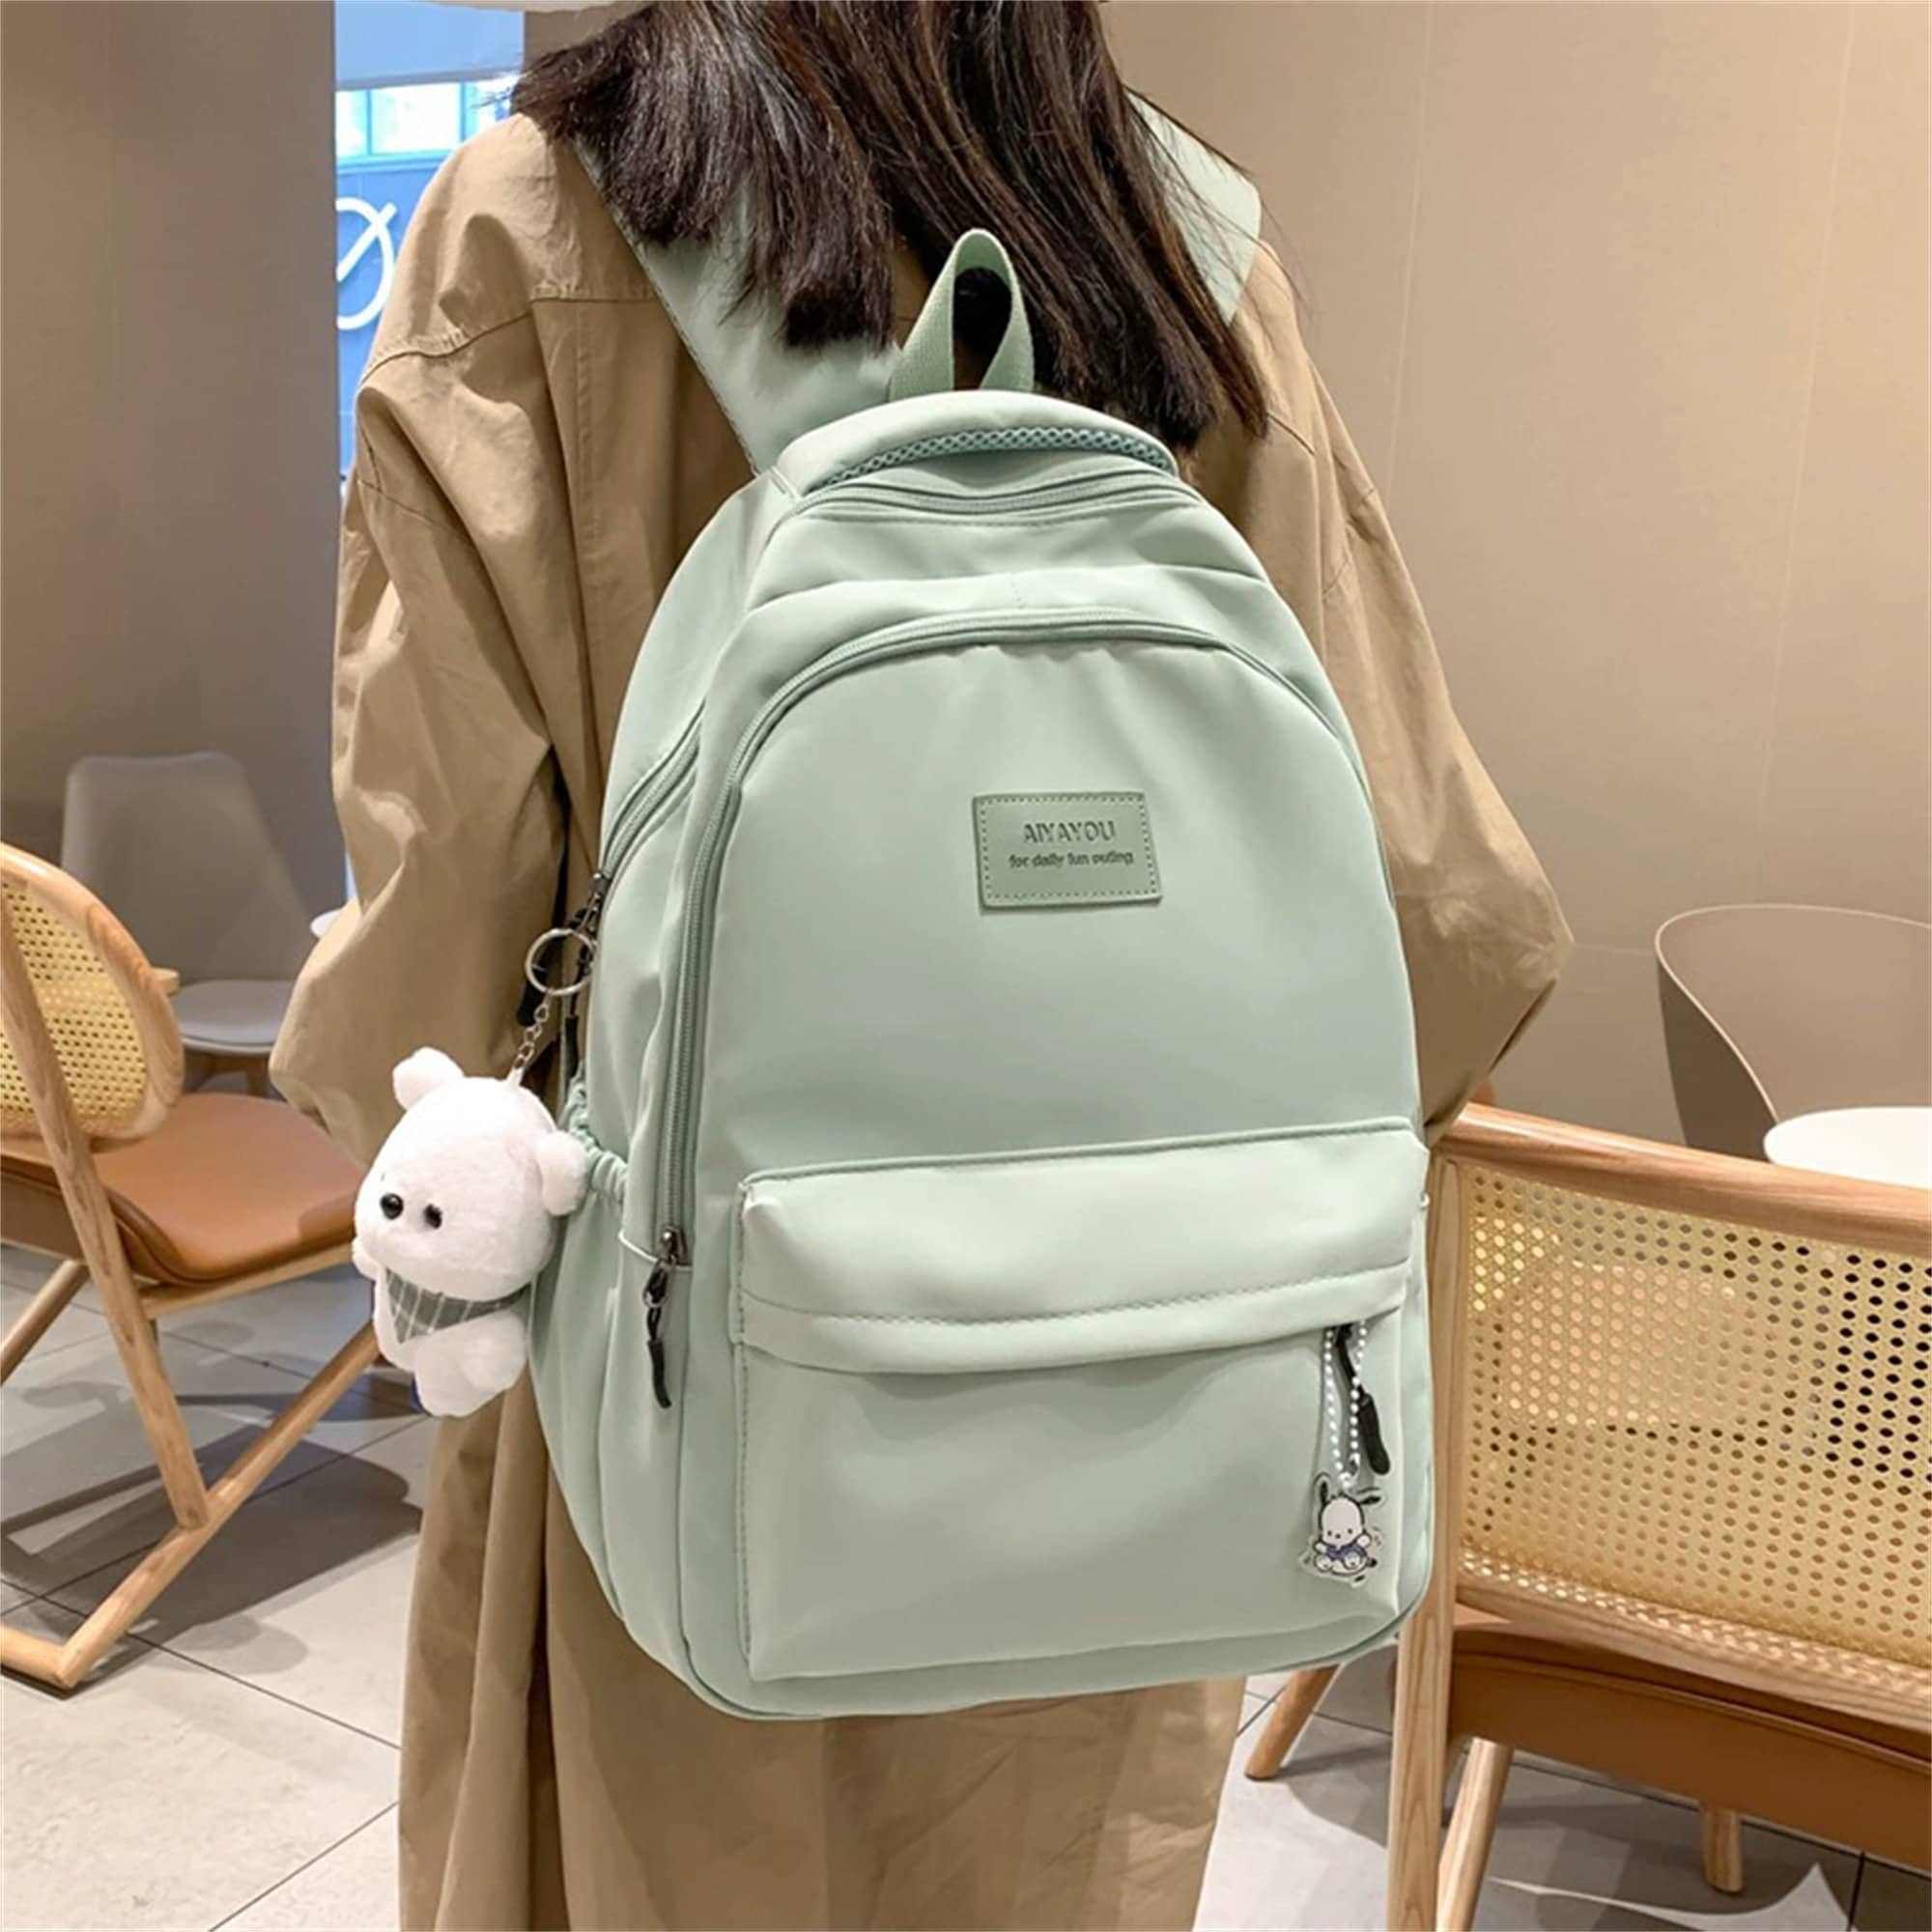 Share 79+ new college bag girl - in.cdgdbentre